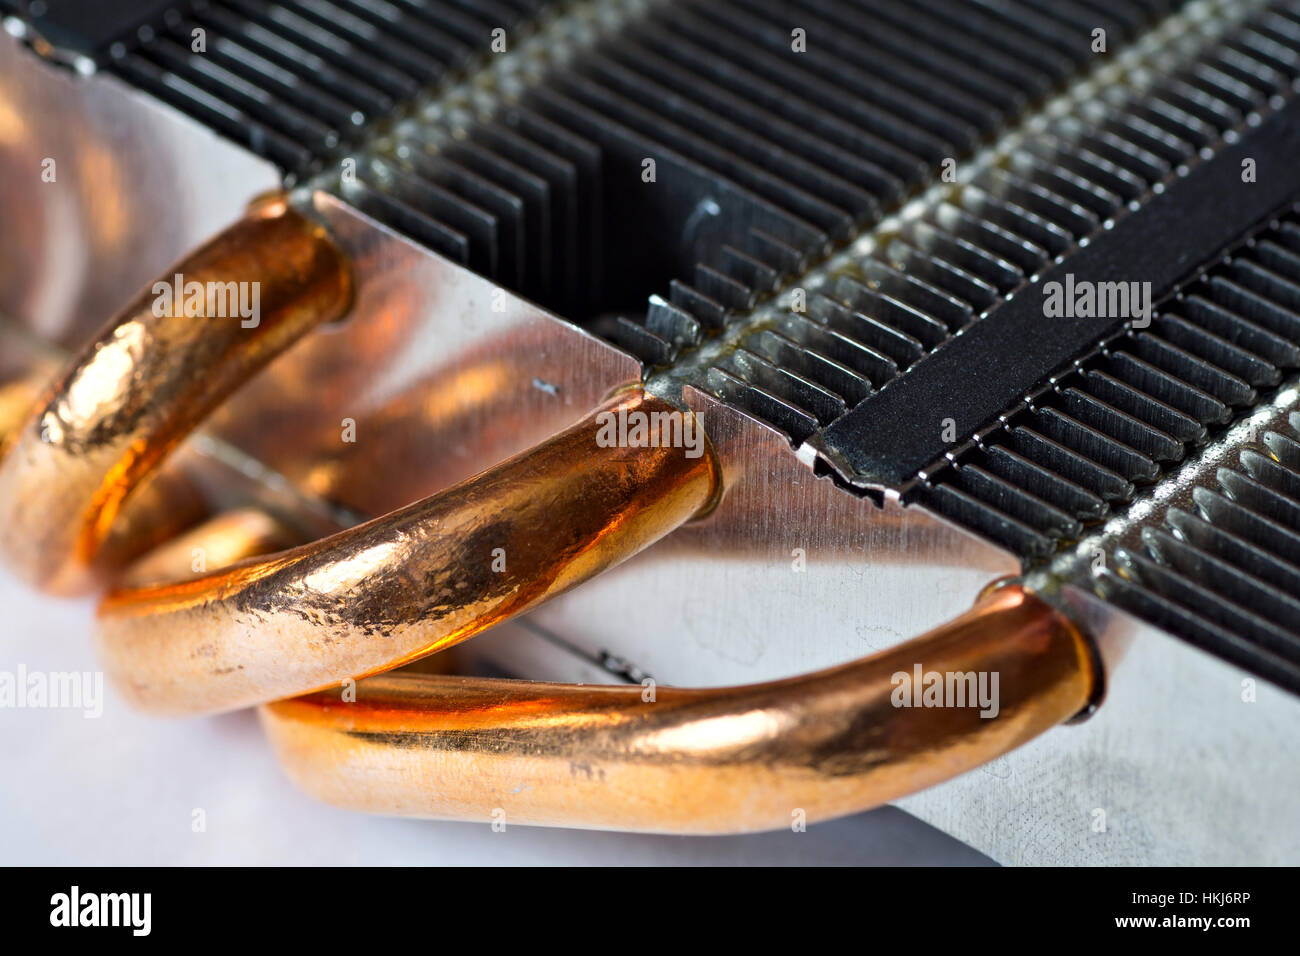 Aluminum radiator with copper heat pipe for better cooling CPU Stock Photo